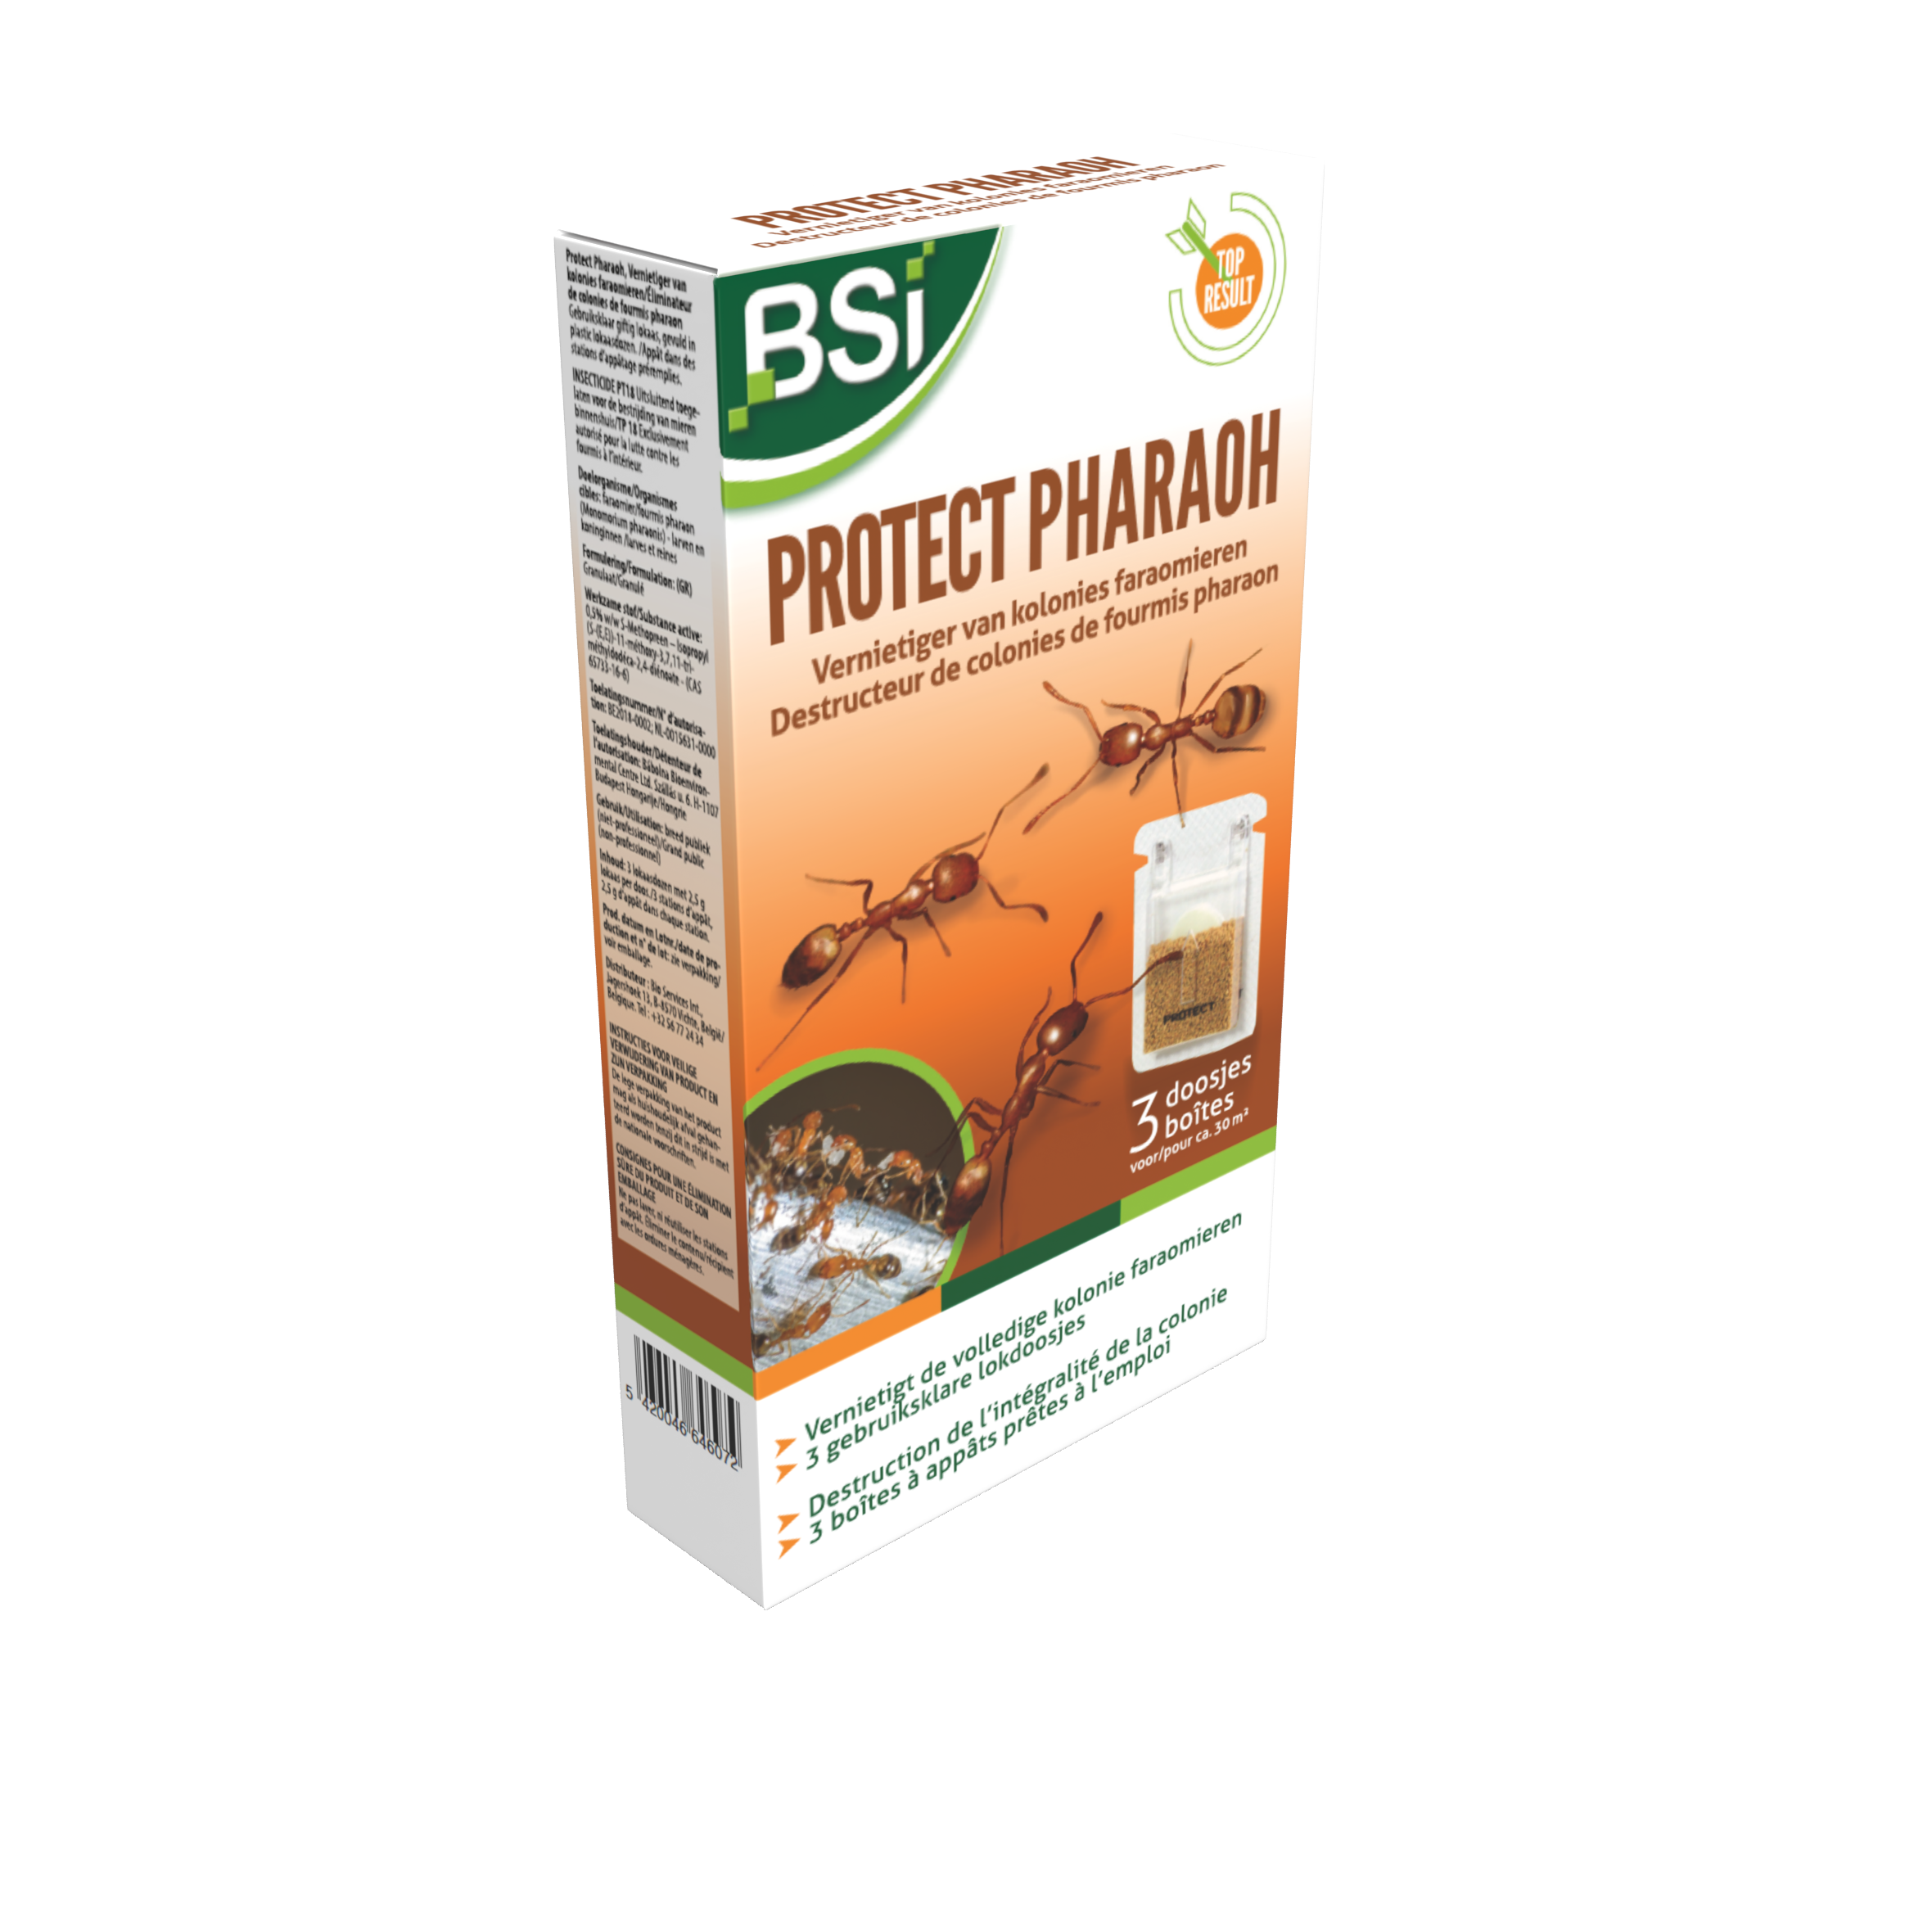 BSI Protect Pharaoh Insecticide 3 st, image